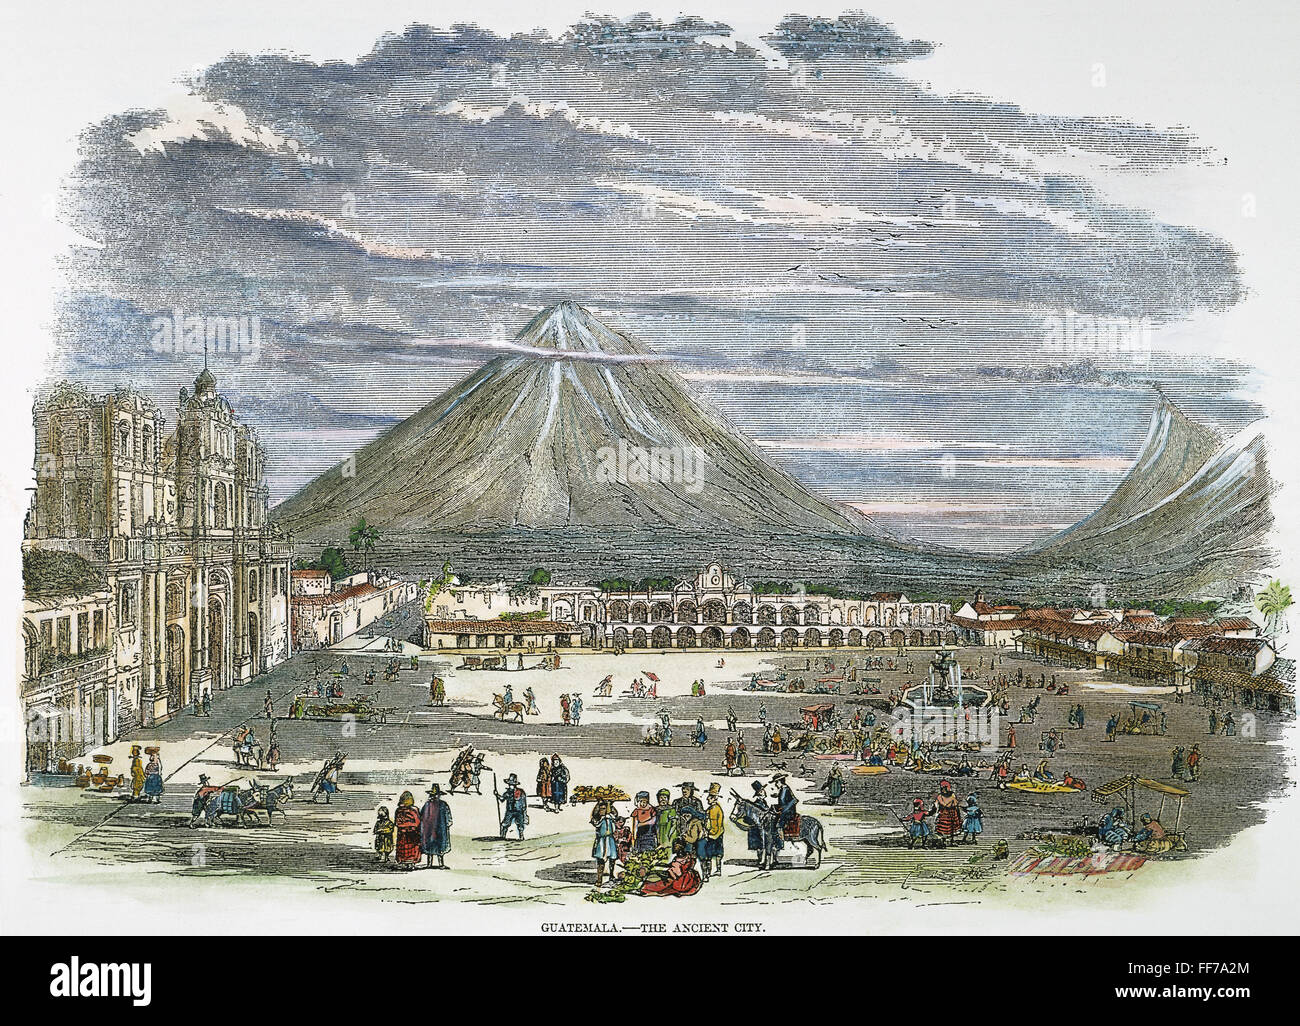 GUATEMALA CITY, 1856. /nThe valley city of Guatemala in the central highlands. English engraving, 1856. Stock Photo